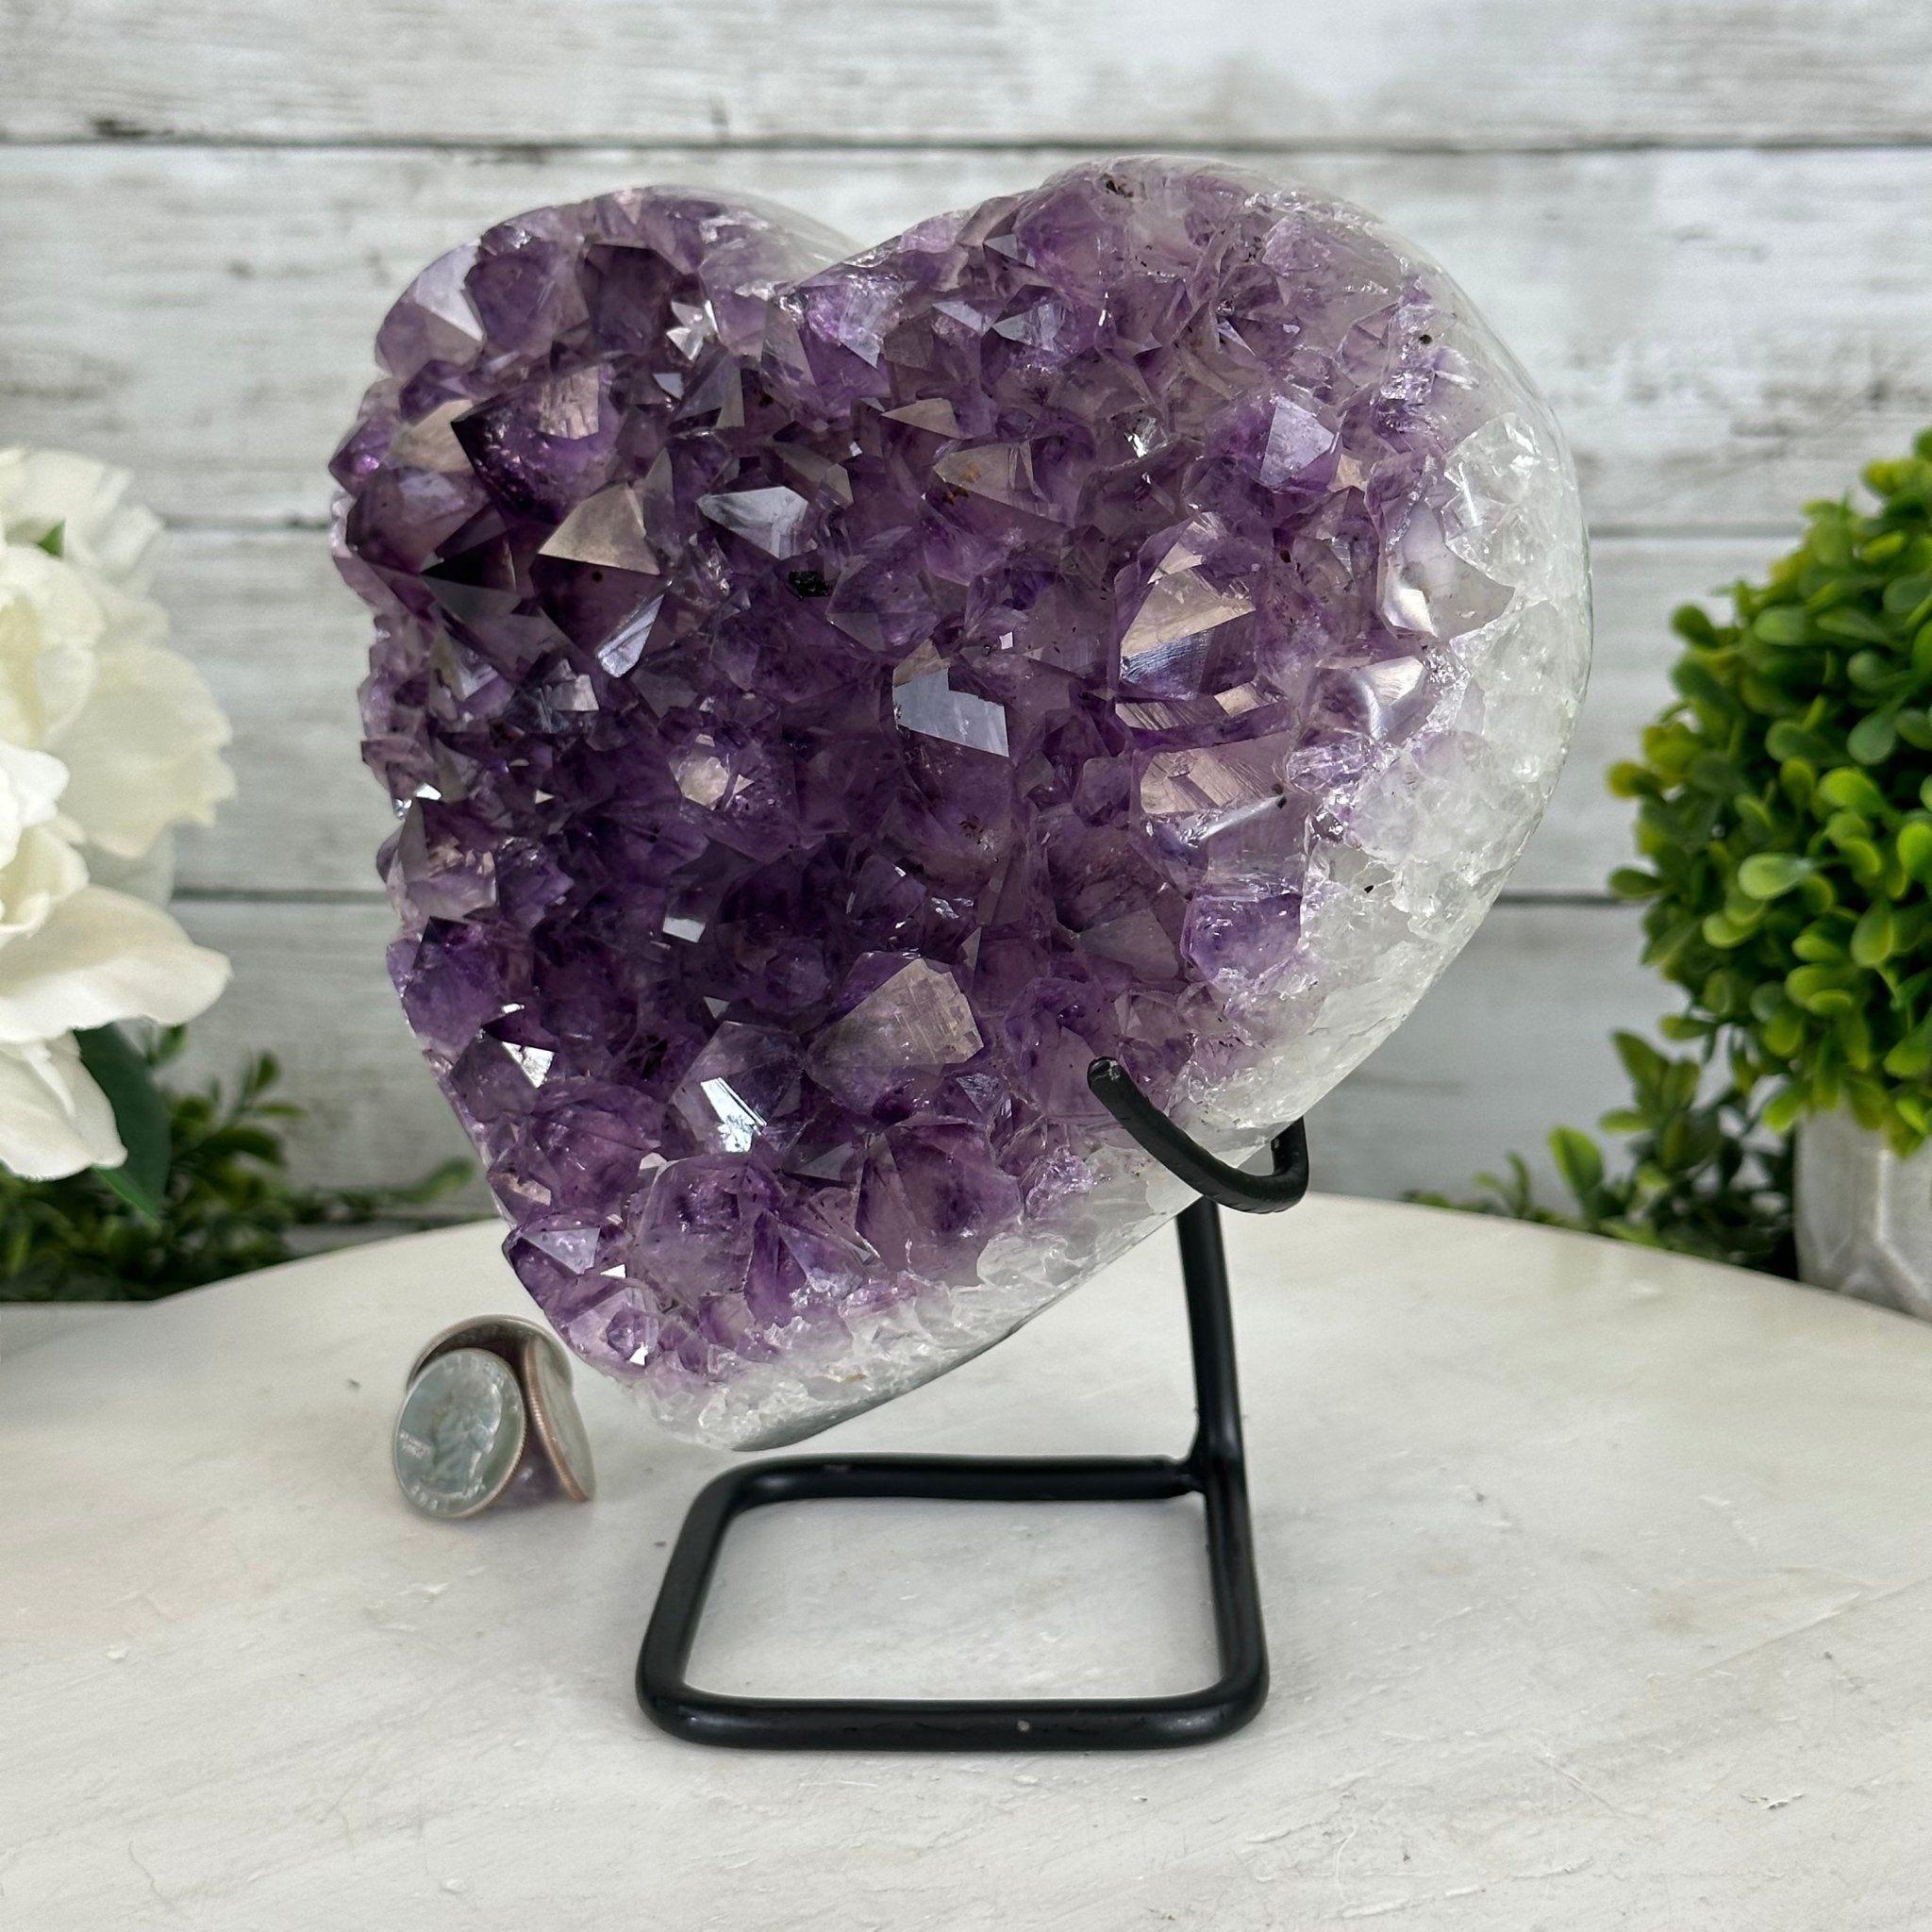 Extra Quality Amethyst Heart Geode w/ metal stand, 5.8 lbs & 7.2" Tall #5463-0290 - Brazil GemsBrazil GemsExtra Quality Amethyst Heart Geode w/ metal stand, 5.8 lbs & 7.2" Tall #5463-0290Hearts5463-0290